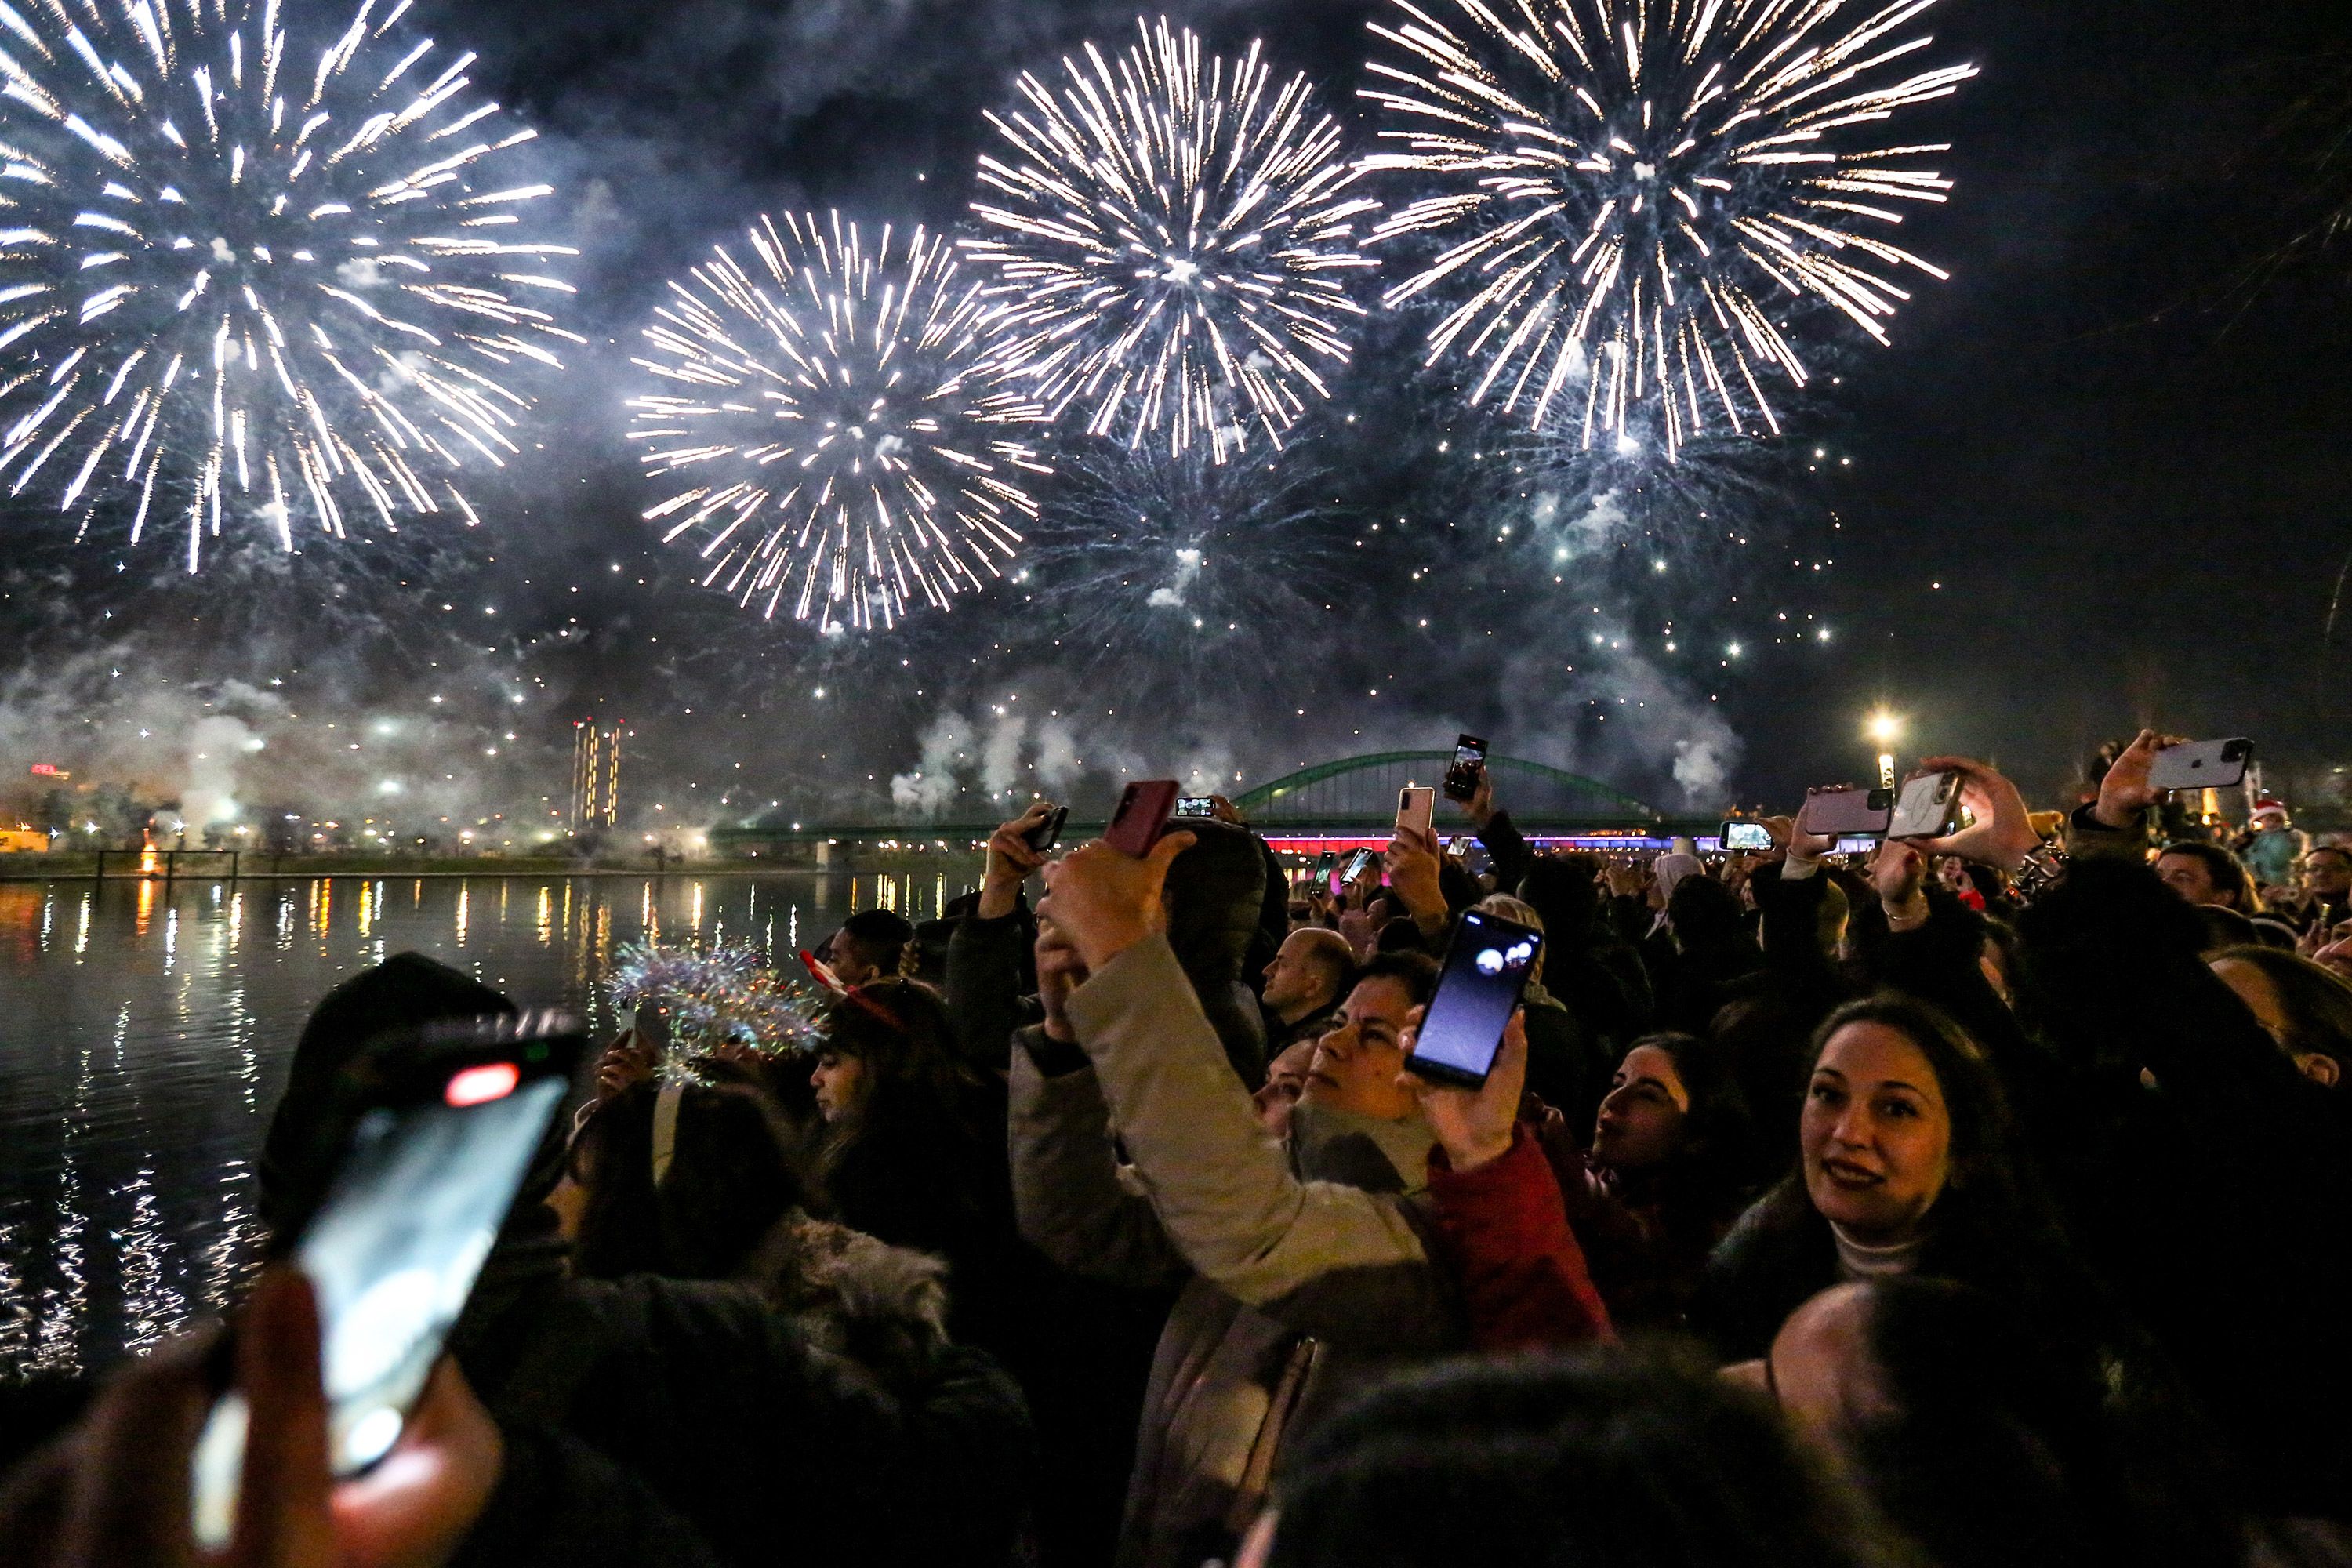 New Year's Eve celebrations around the world: Traditions embraced